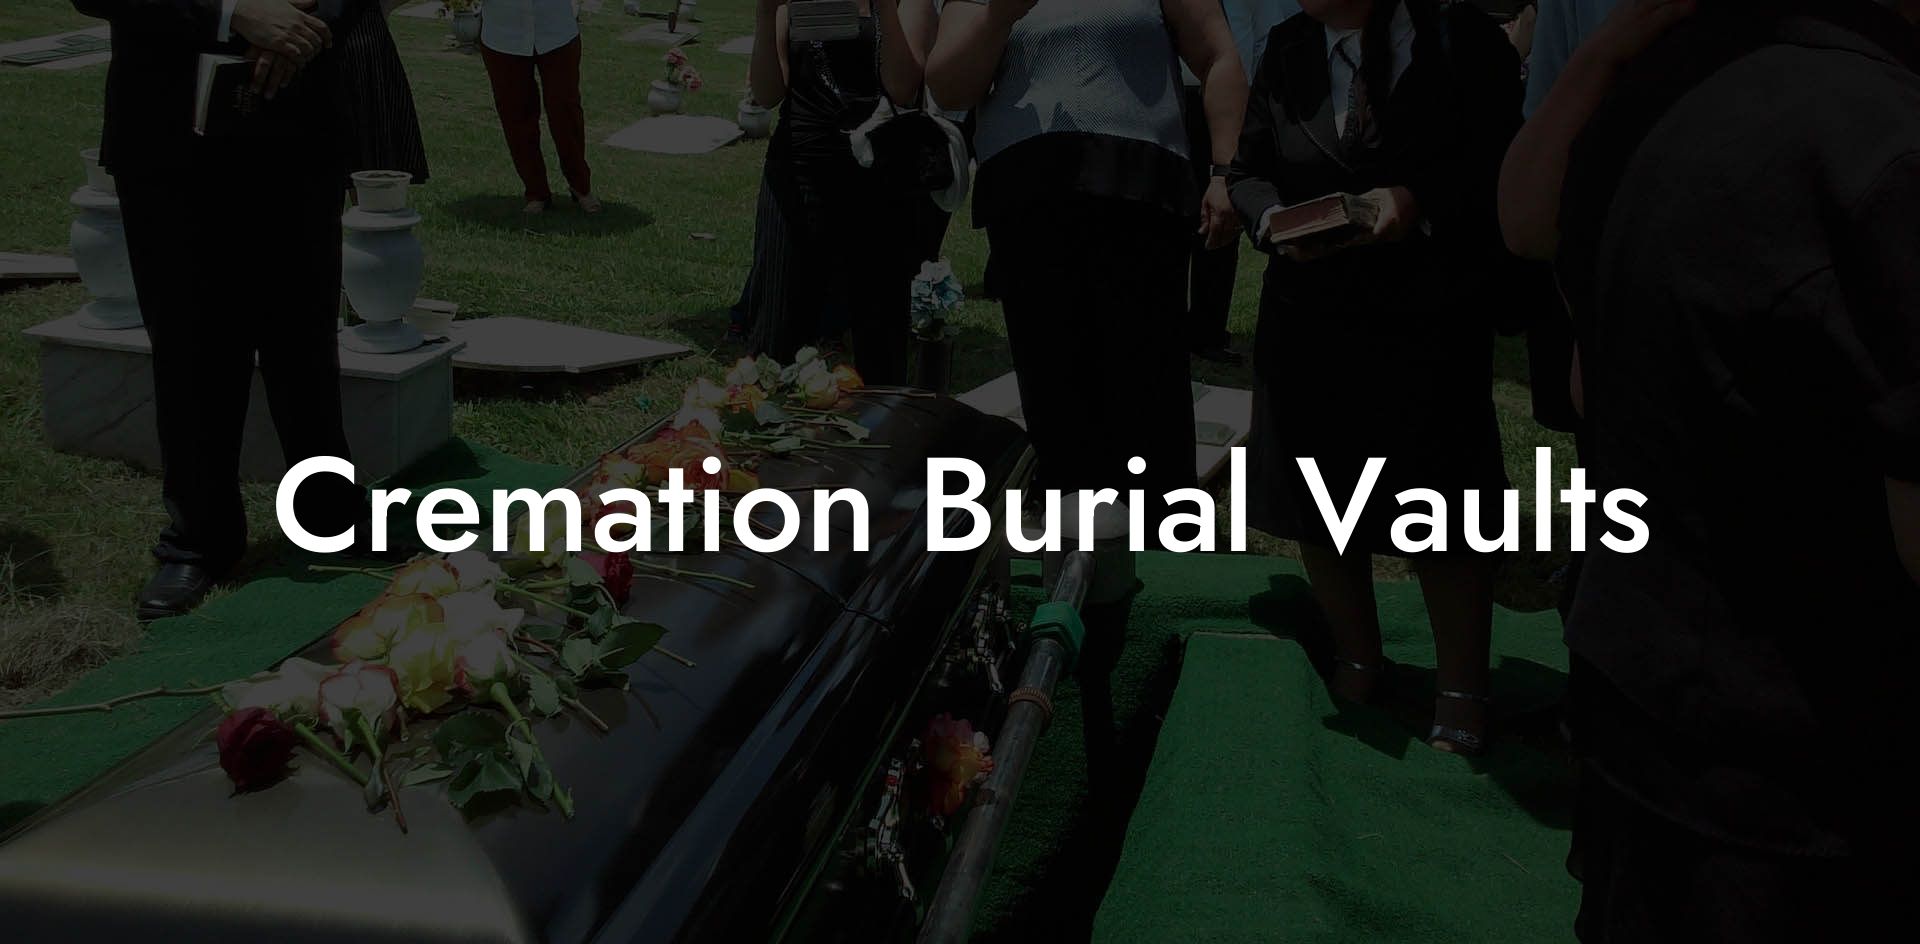 Cremation Burial Vaults